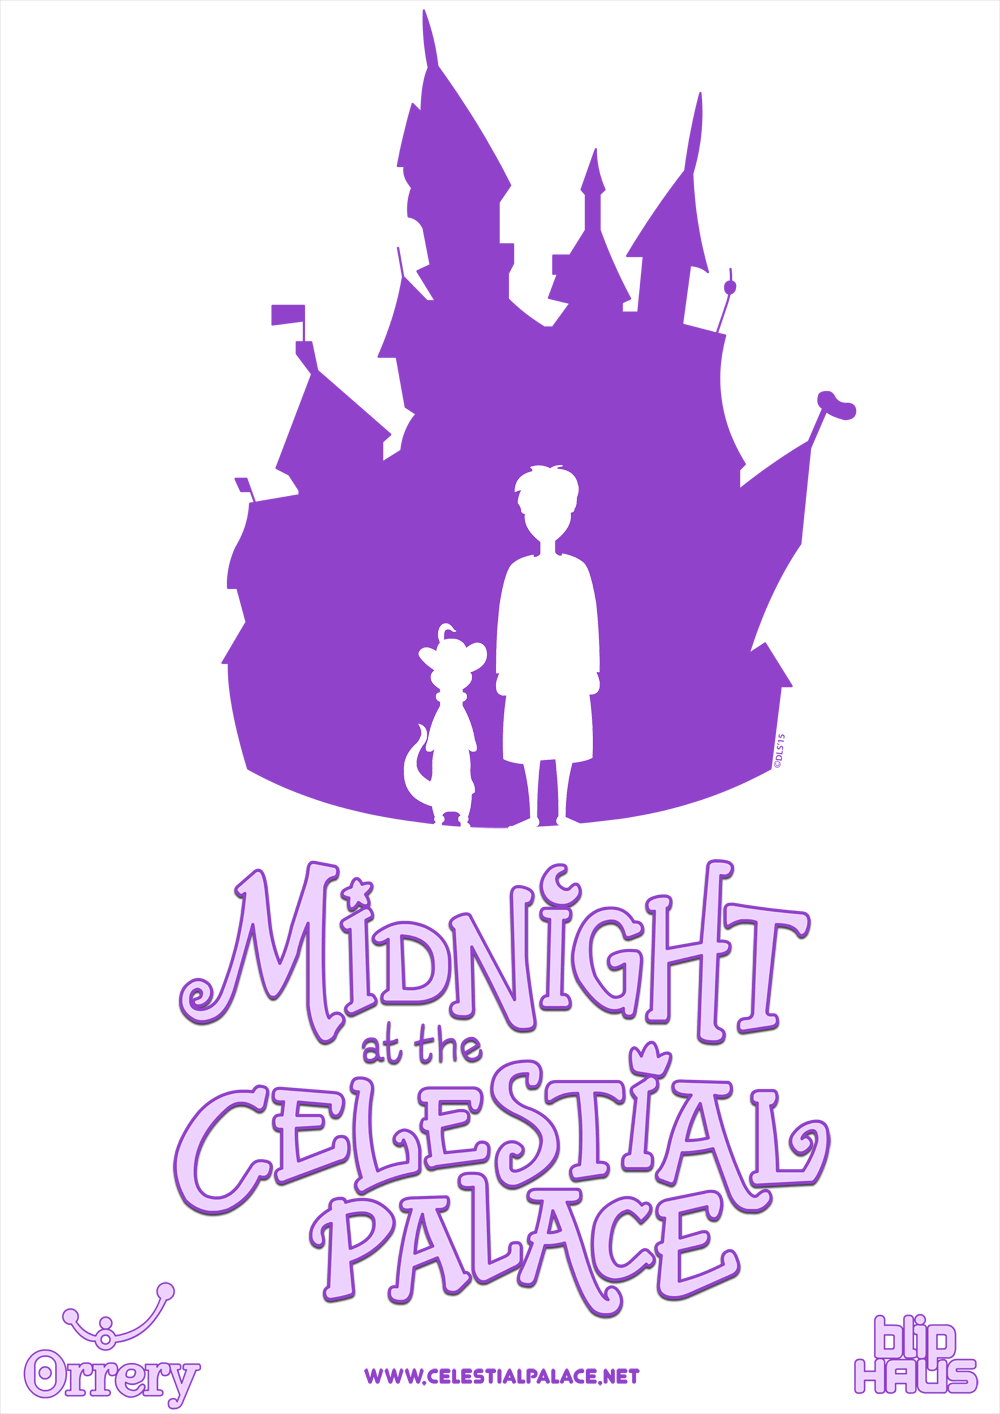 Midnight at the Celestial Palace - Portada.png